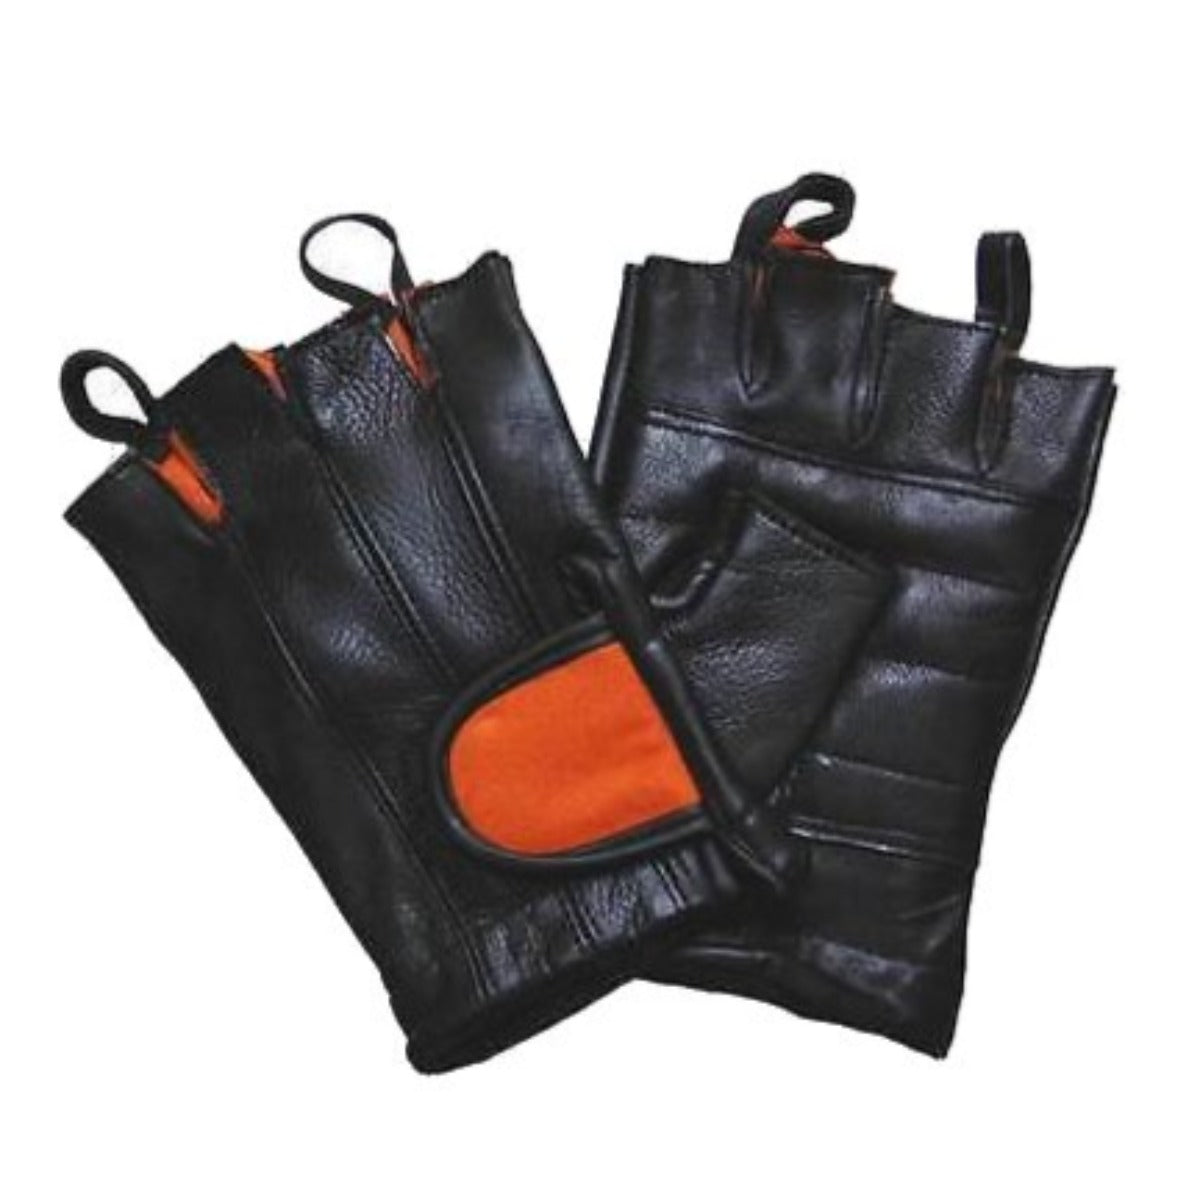 Vance Leather Black and Orange Padded Palm Fingerless Glove with Pull Tabs